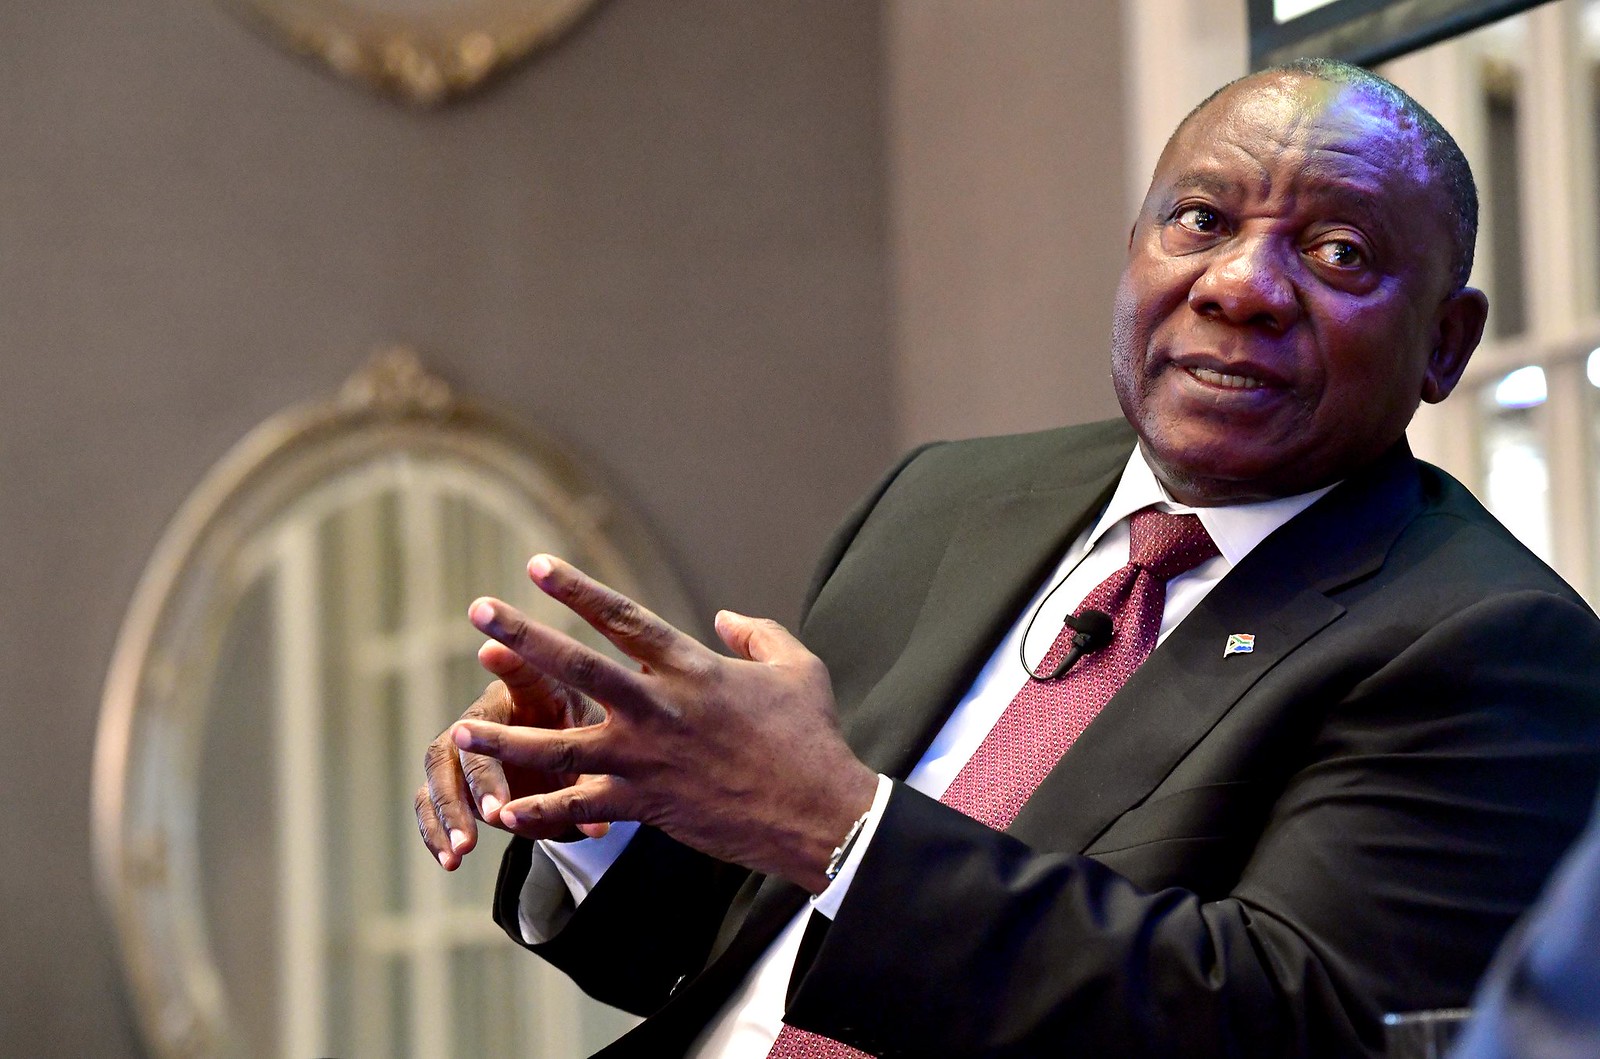 President Cyril Ramaphosa was accused of failing to disclose funding for his election campaign